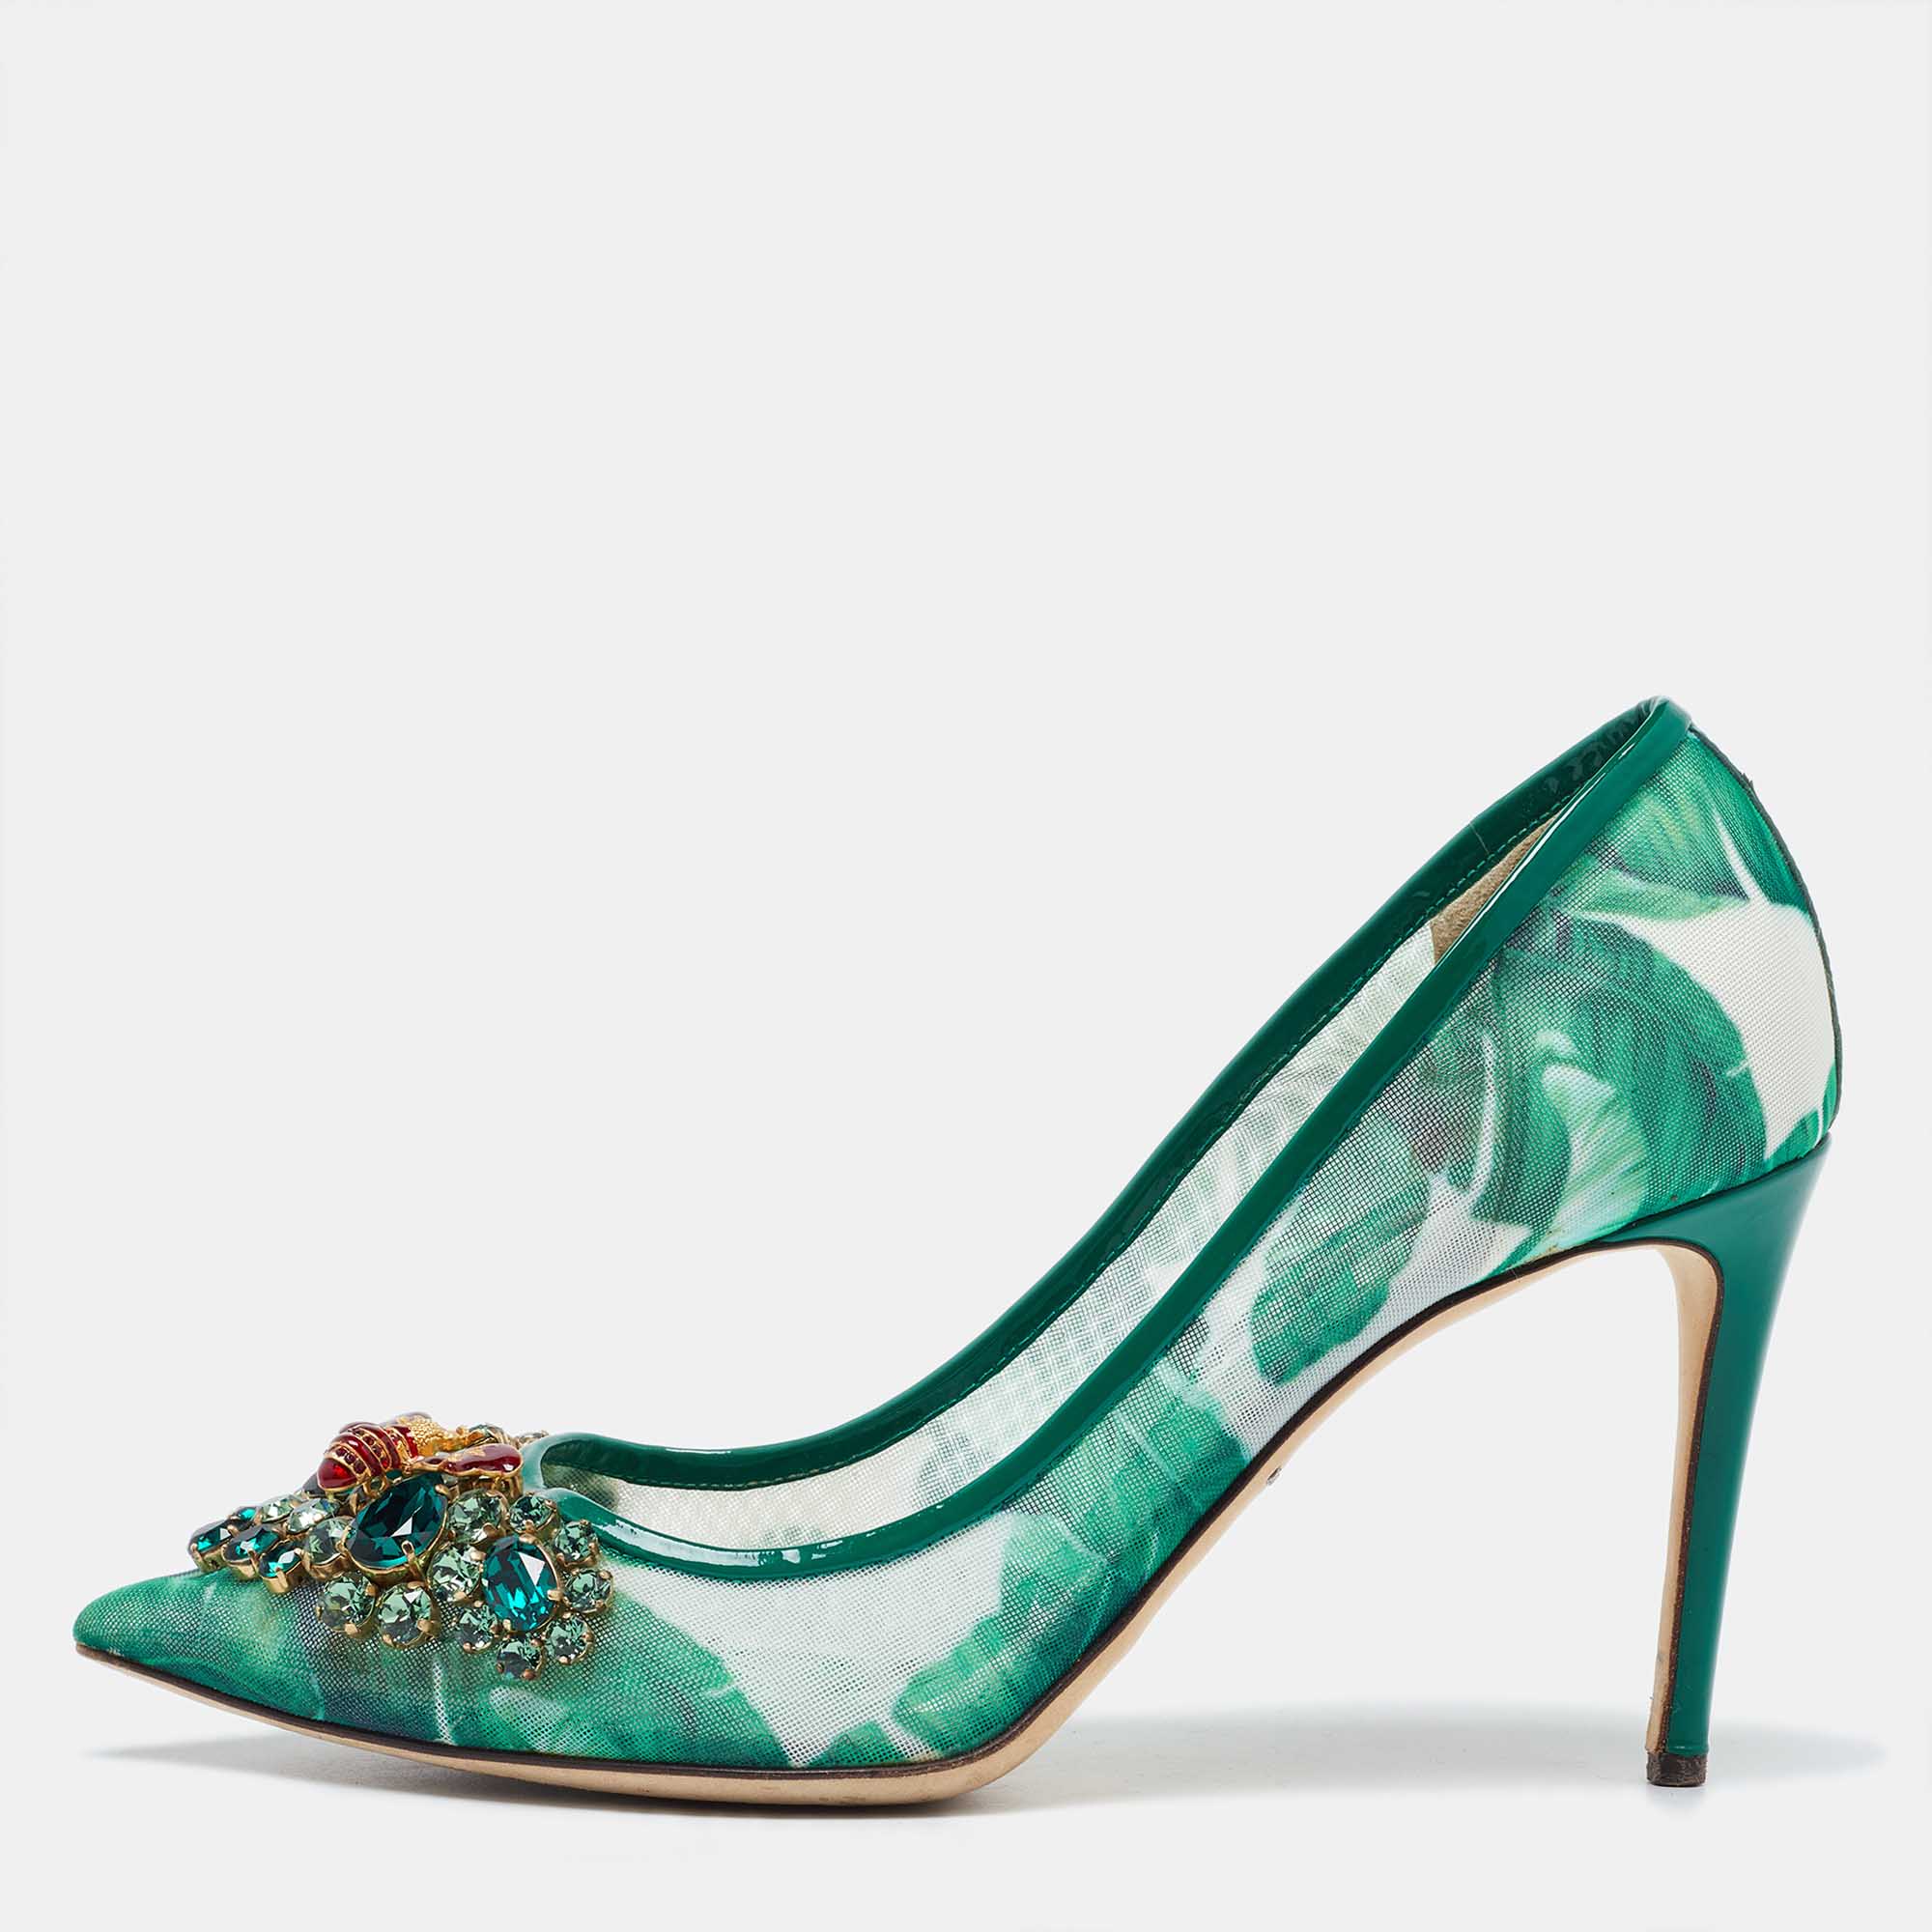 Dolce & gabbana green mesh and patent leather crystal embellished pointed toe pumps size 39.5